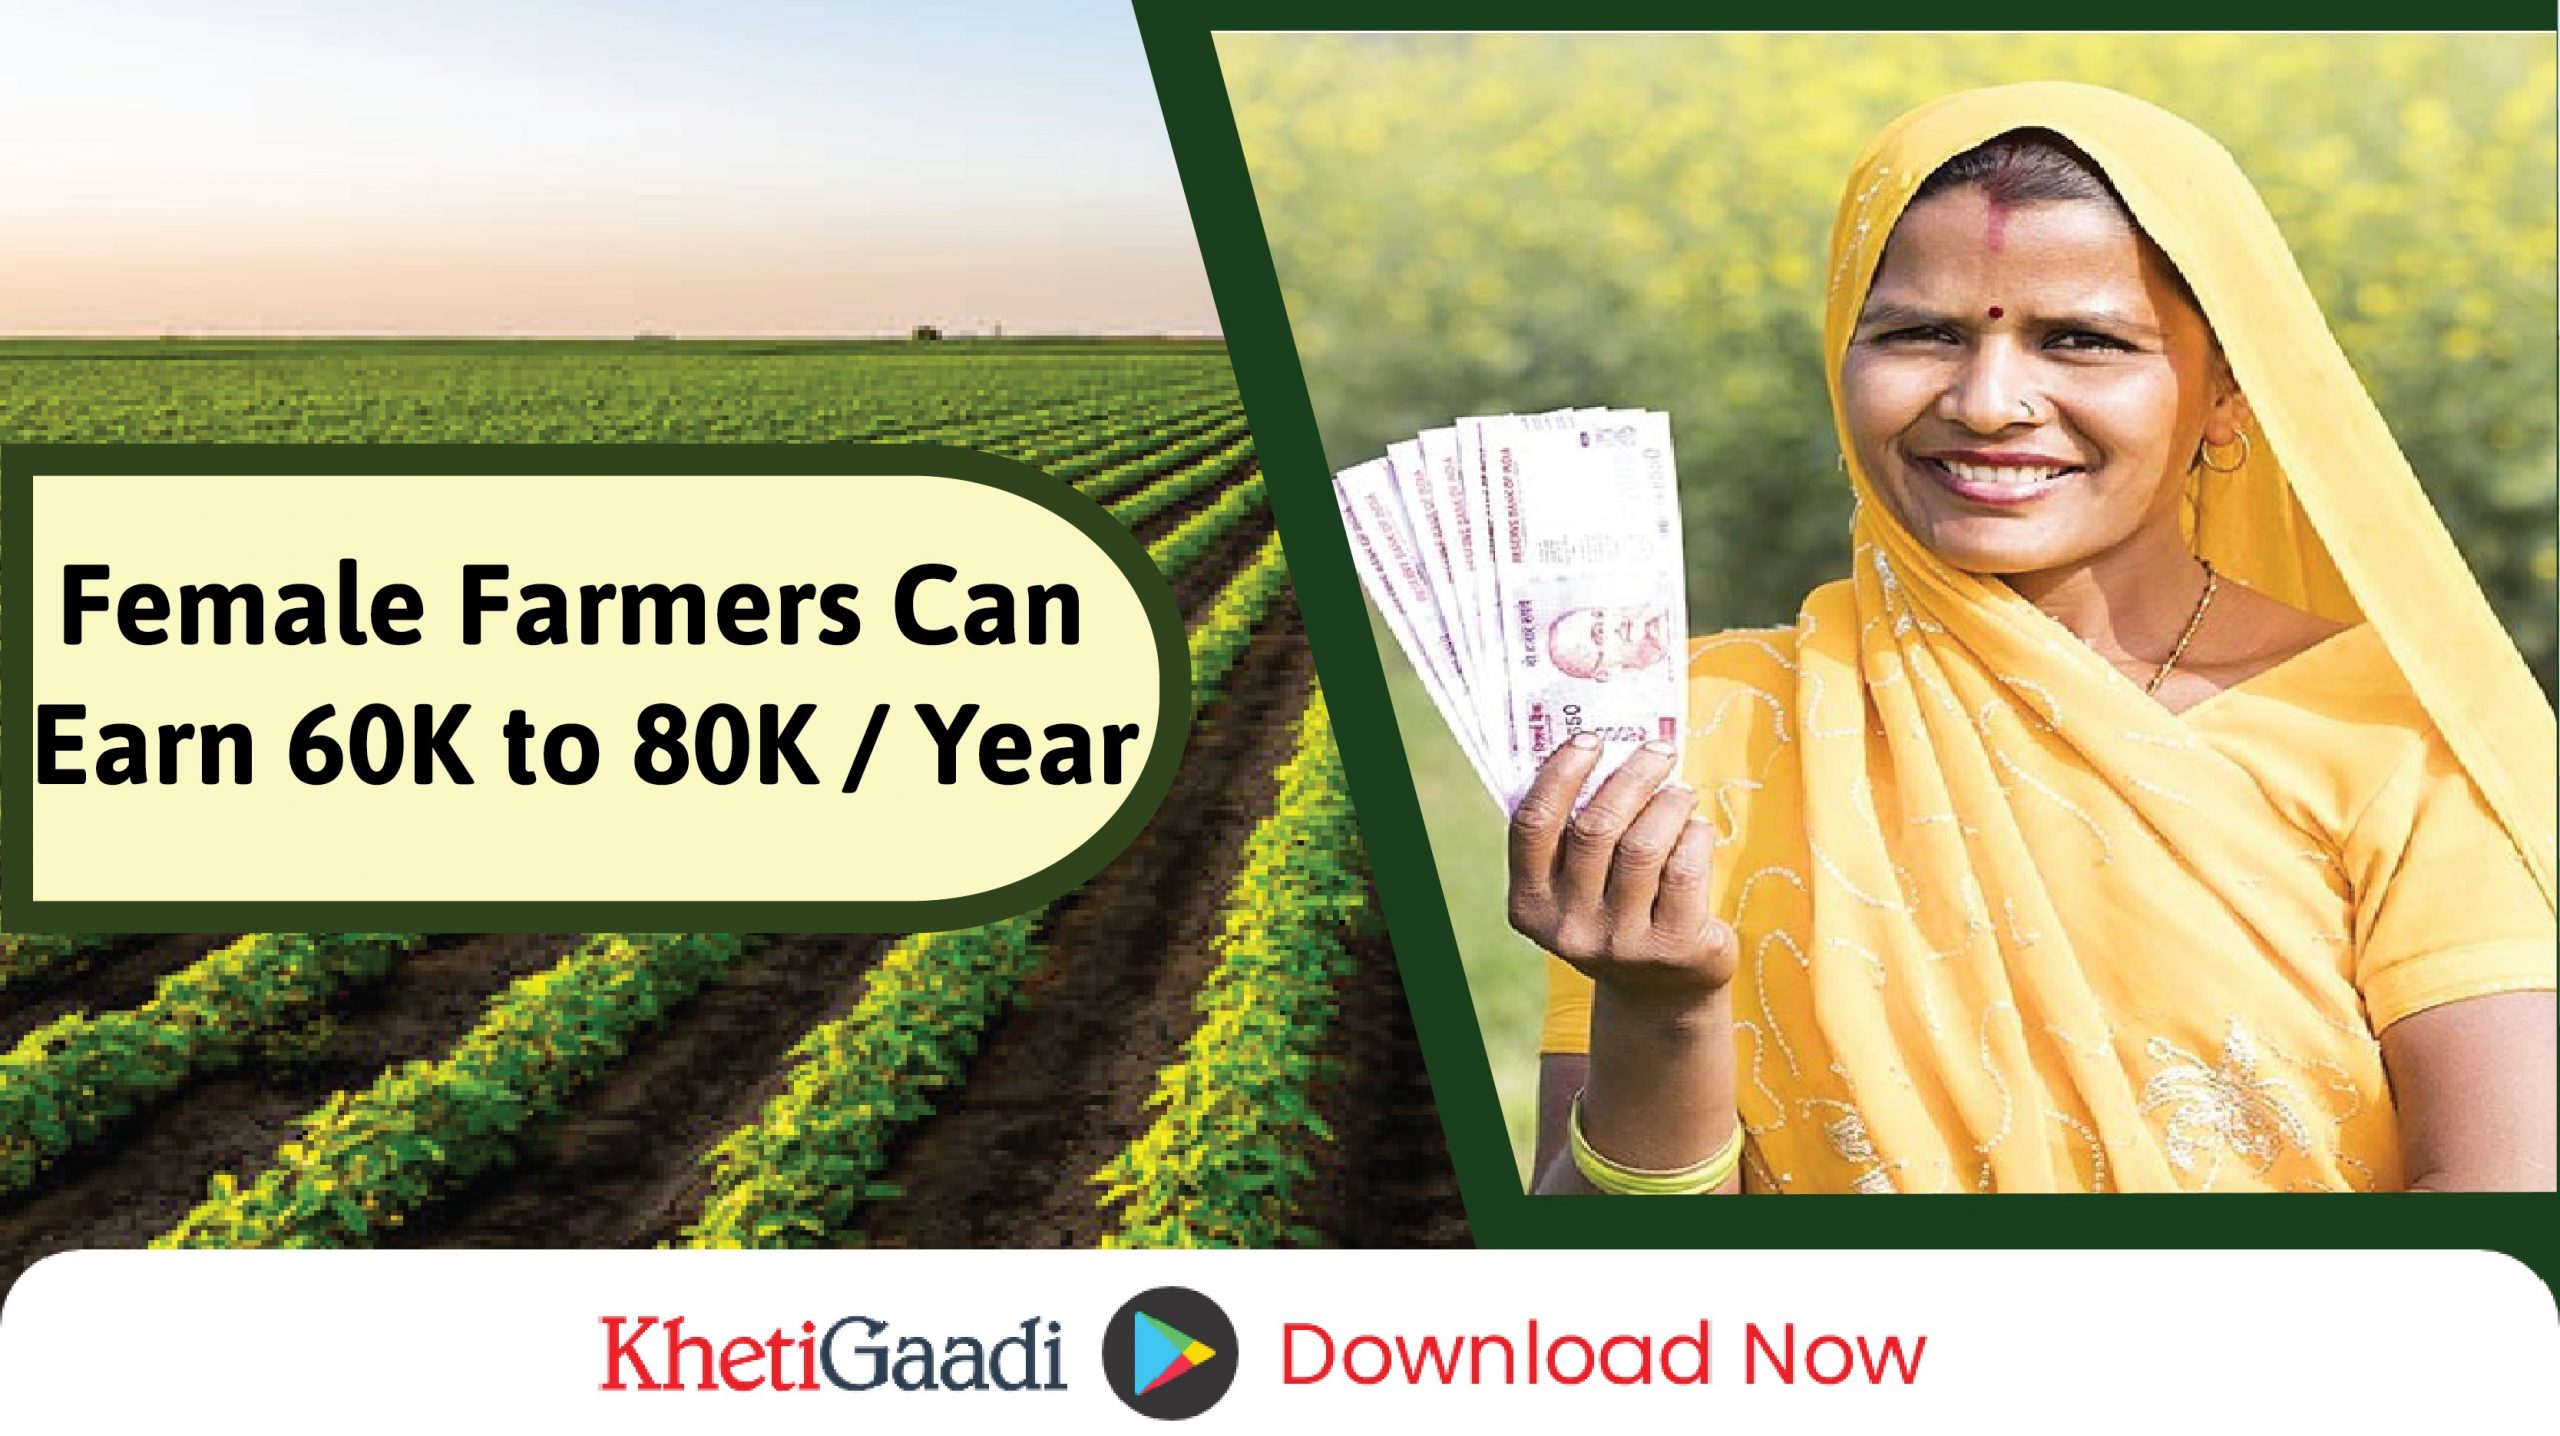 Now female farmers can earn 60 to 80 thousand per year.